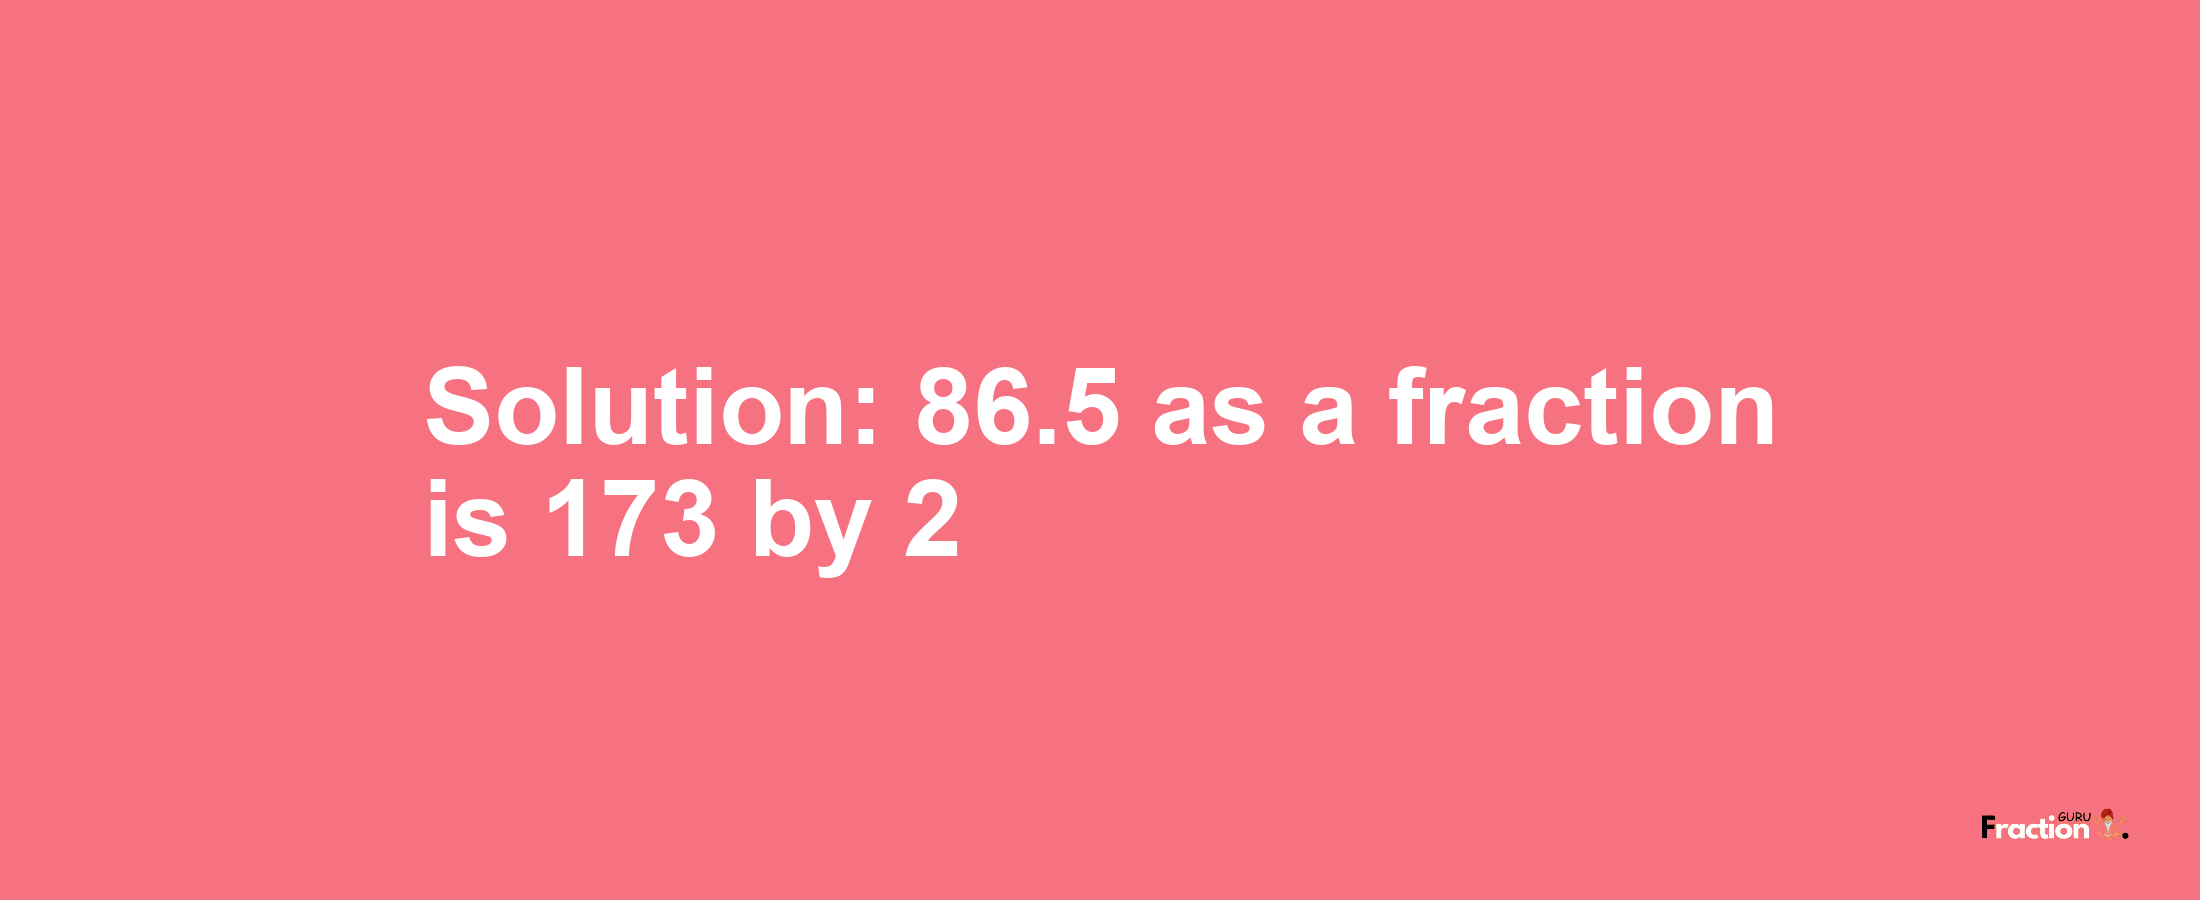 Solution:86.5 as a fraction is 173/2